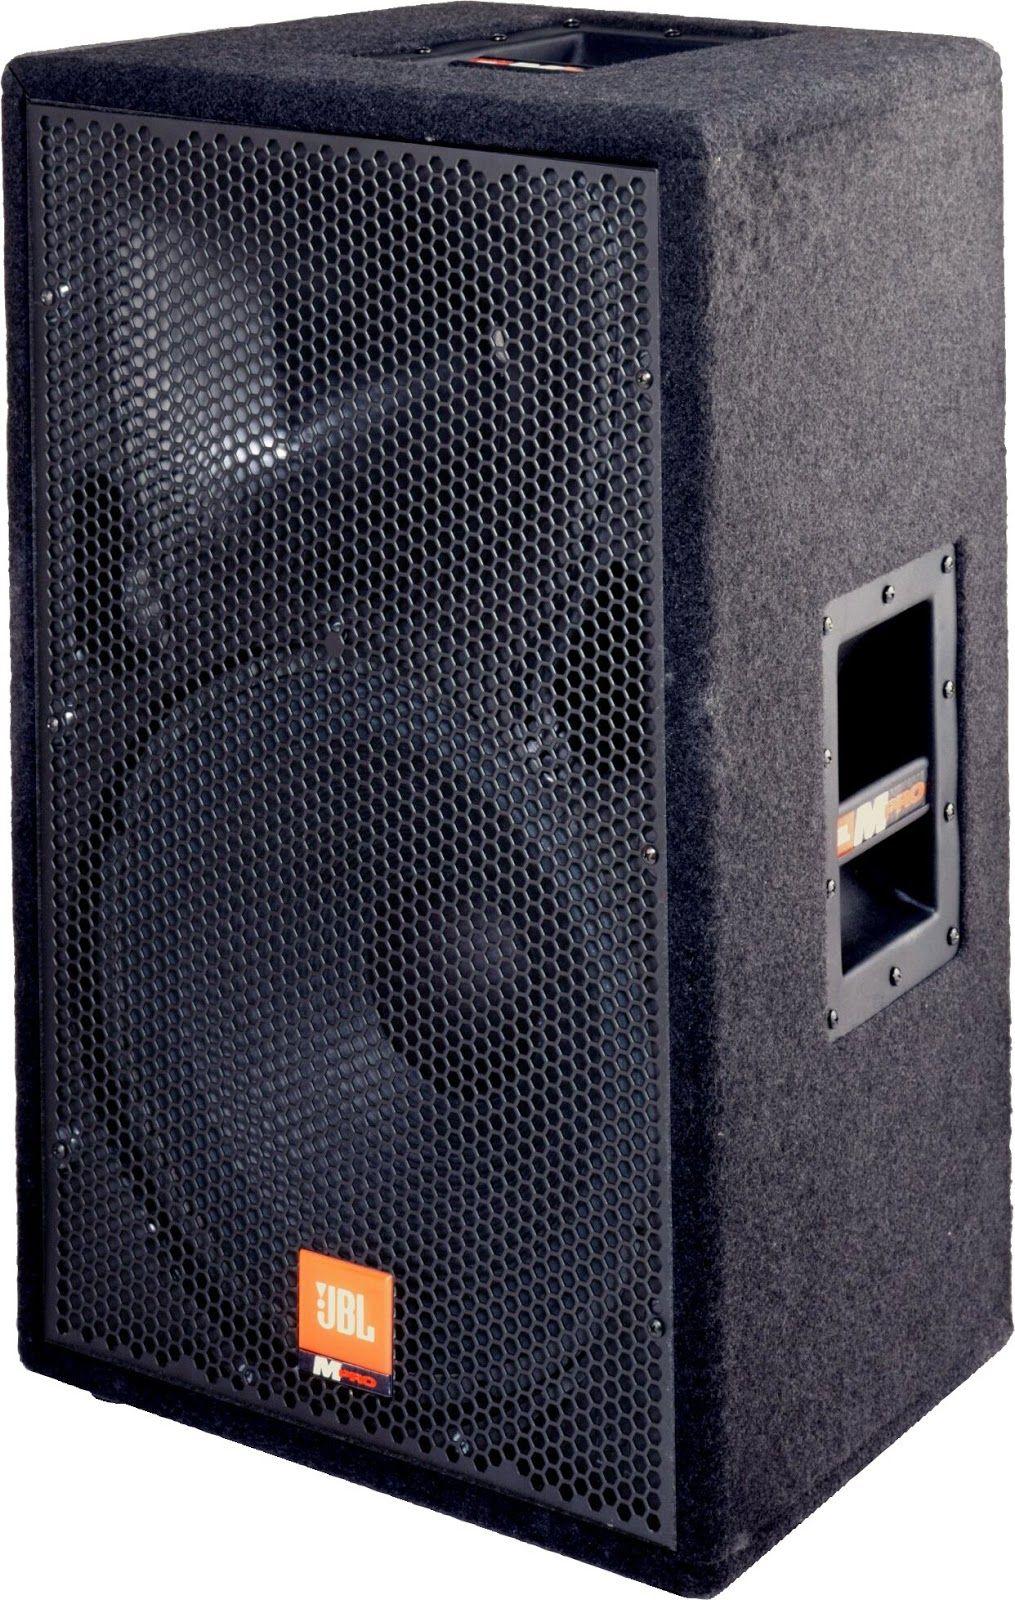 Speakers Speakers are what the music actually comes out of. There are two types of speakers, Powered Speakers and Unpowered Speakers. There are pros and cons to each.